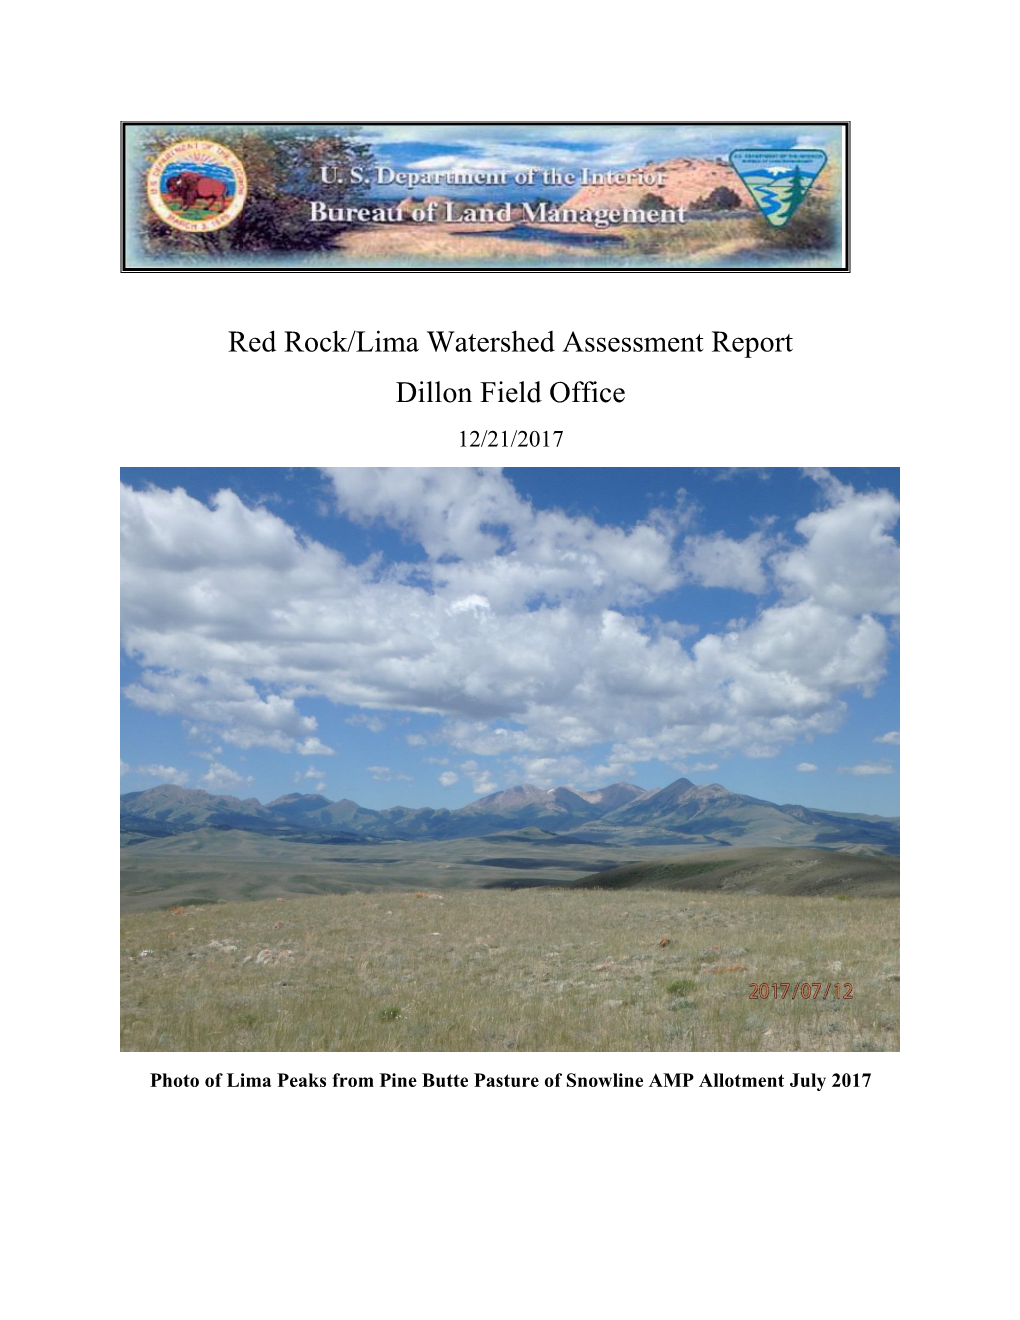 Red Rock/Lima Watershed Assessment Report Dillon Field Office 12/21/2017